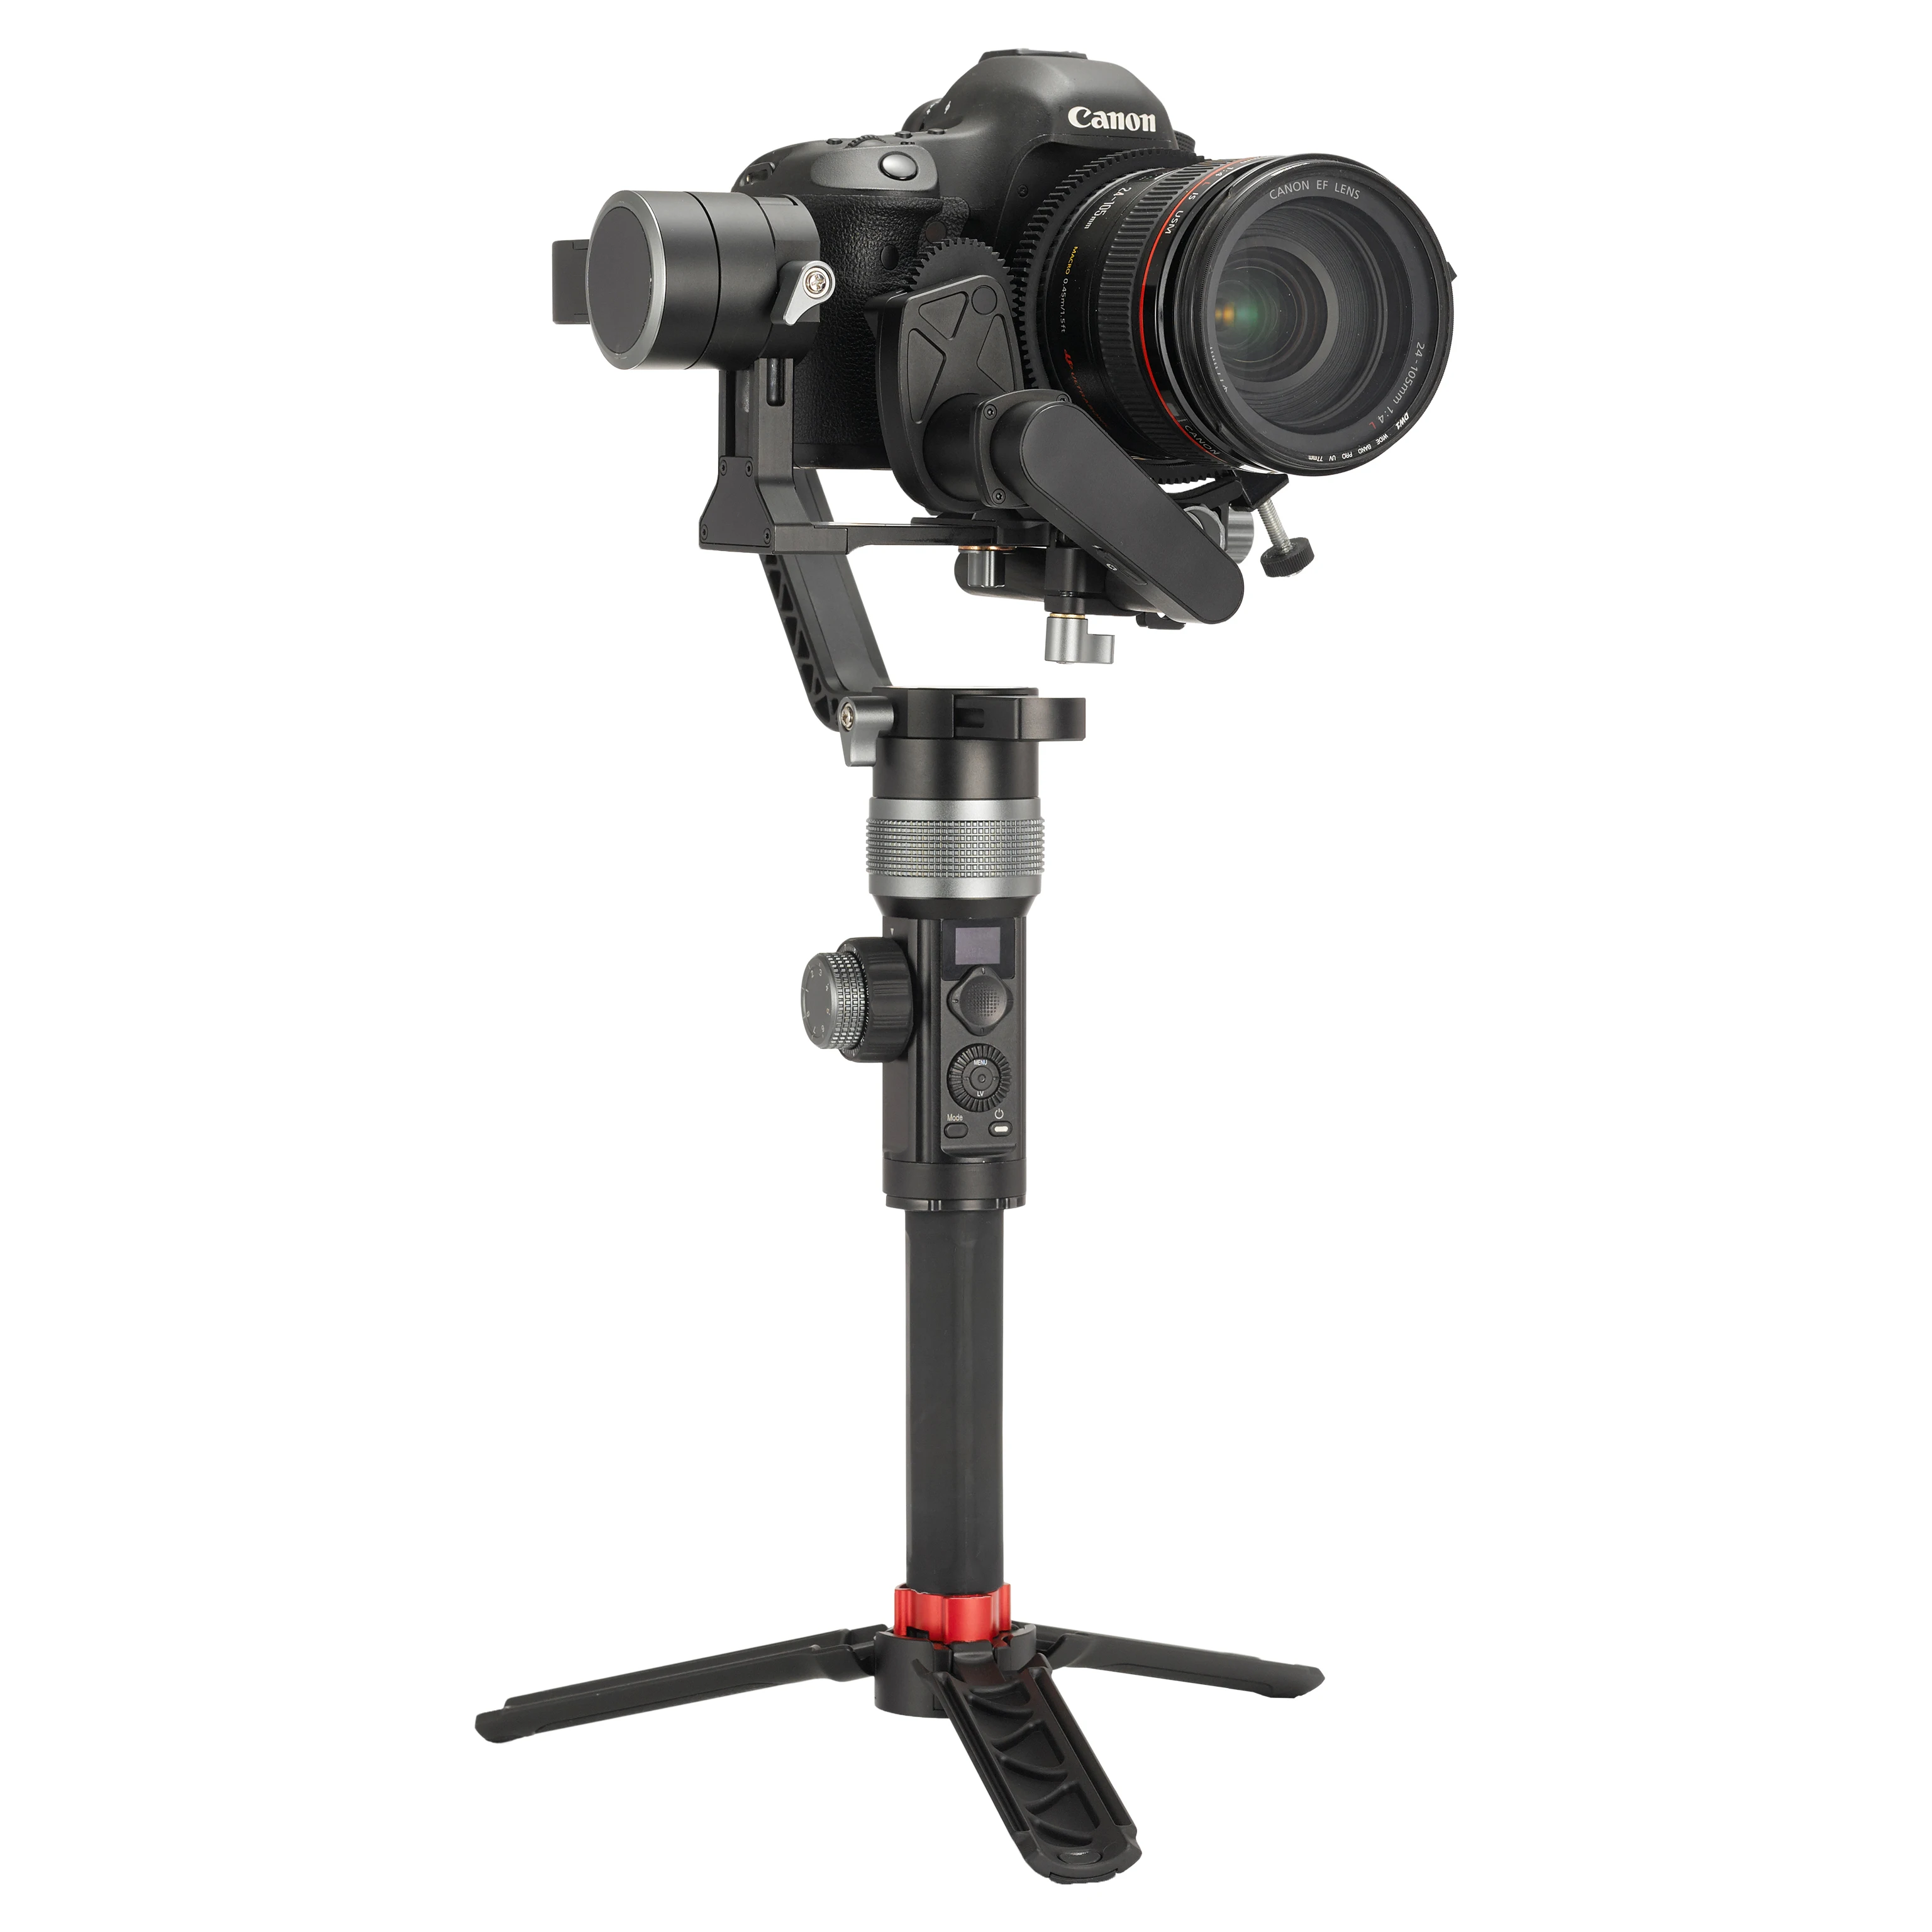 

AFI Professional Heavy Duty Stable DSLR Gimbal D3 with Follow Focus for Video Shooting